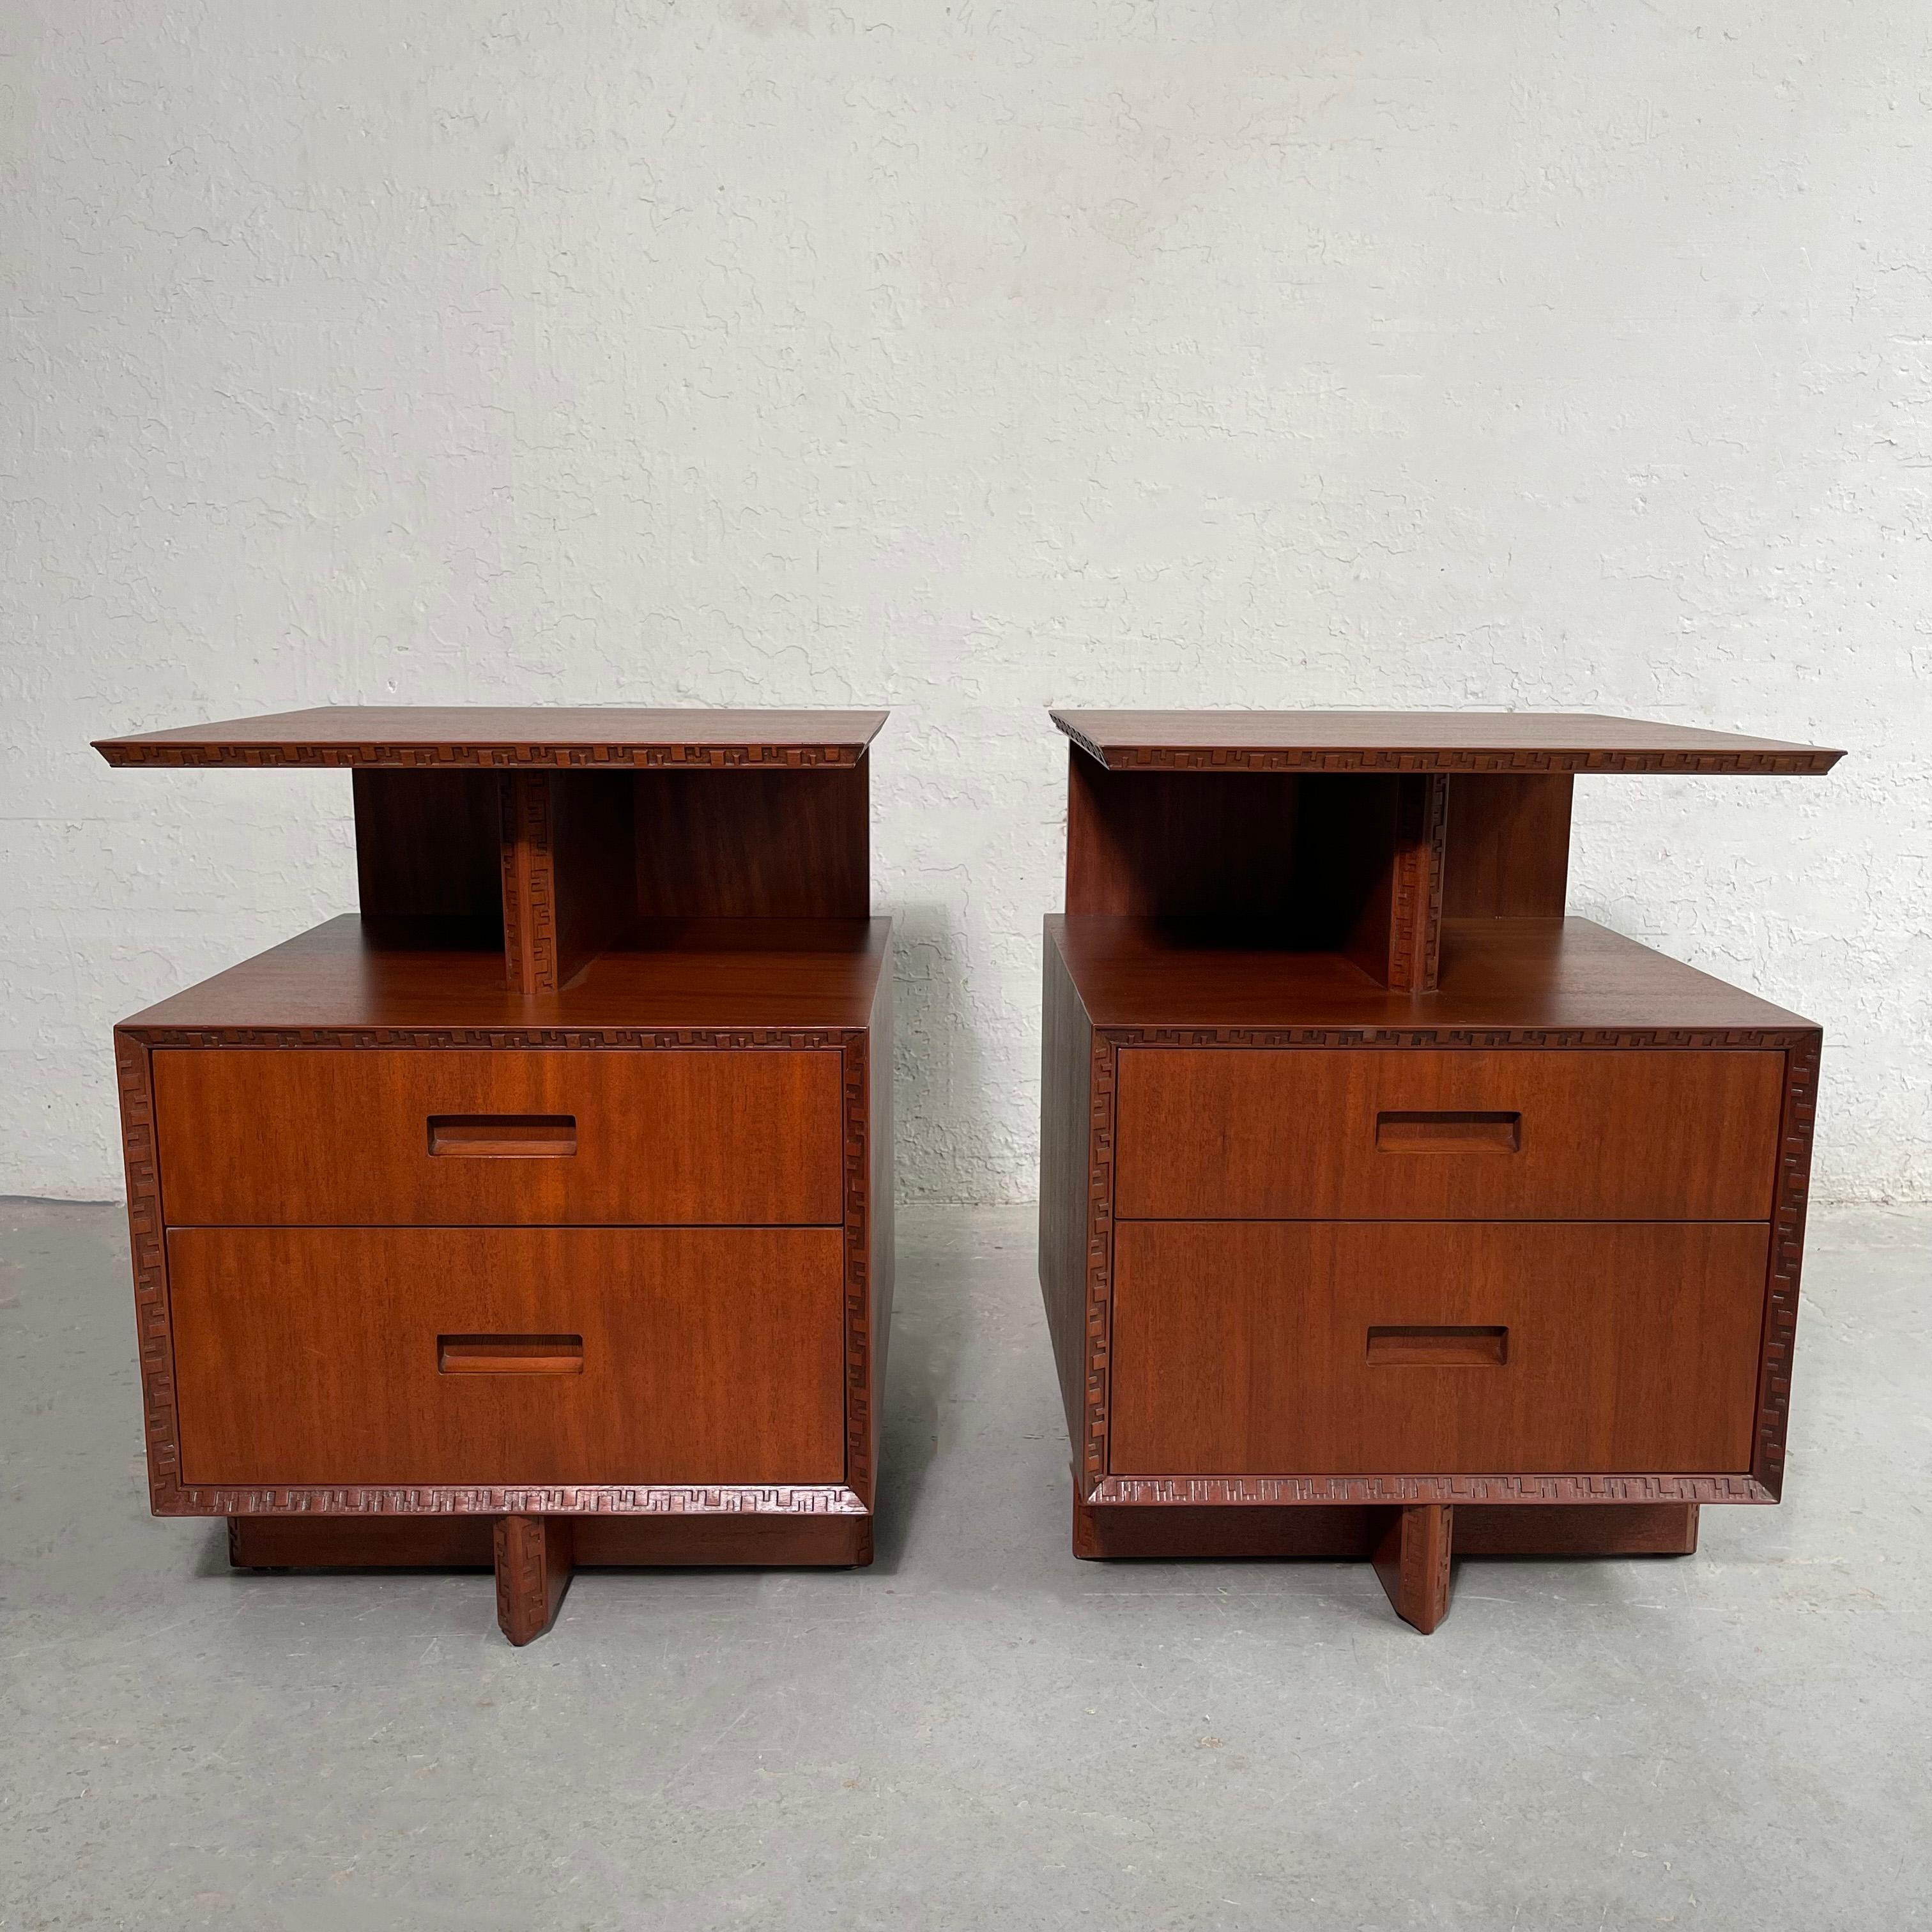 Pair of outstanding, Taliesin Group, tiered mahogany end tables, nightstands by Frank Lloyd Wright for Heritage-Henredon feature a bottom level with two drawers at 18 inches height and a top tier with shelf space below trimmed in the signature